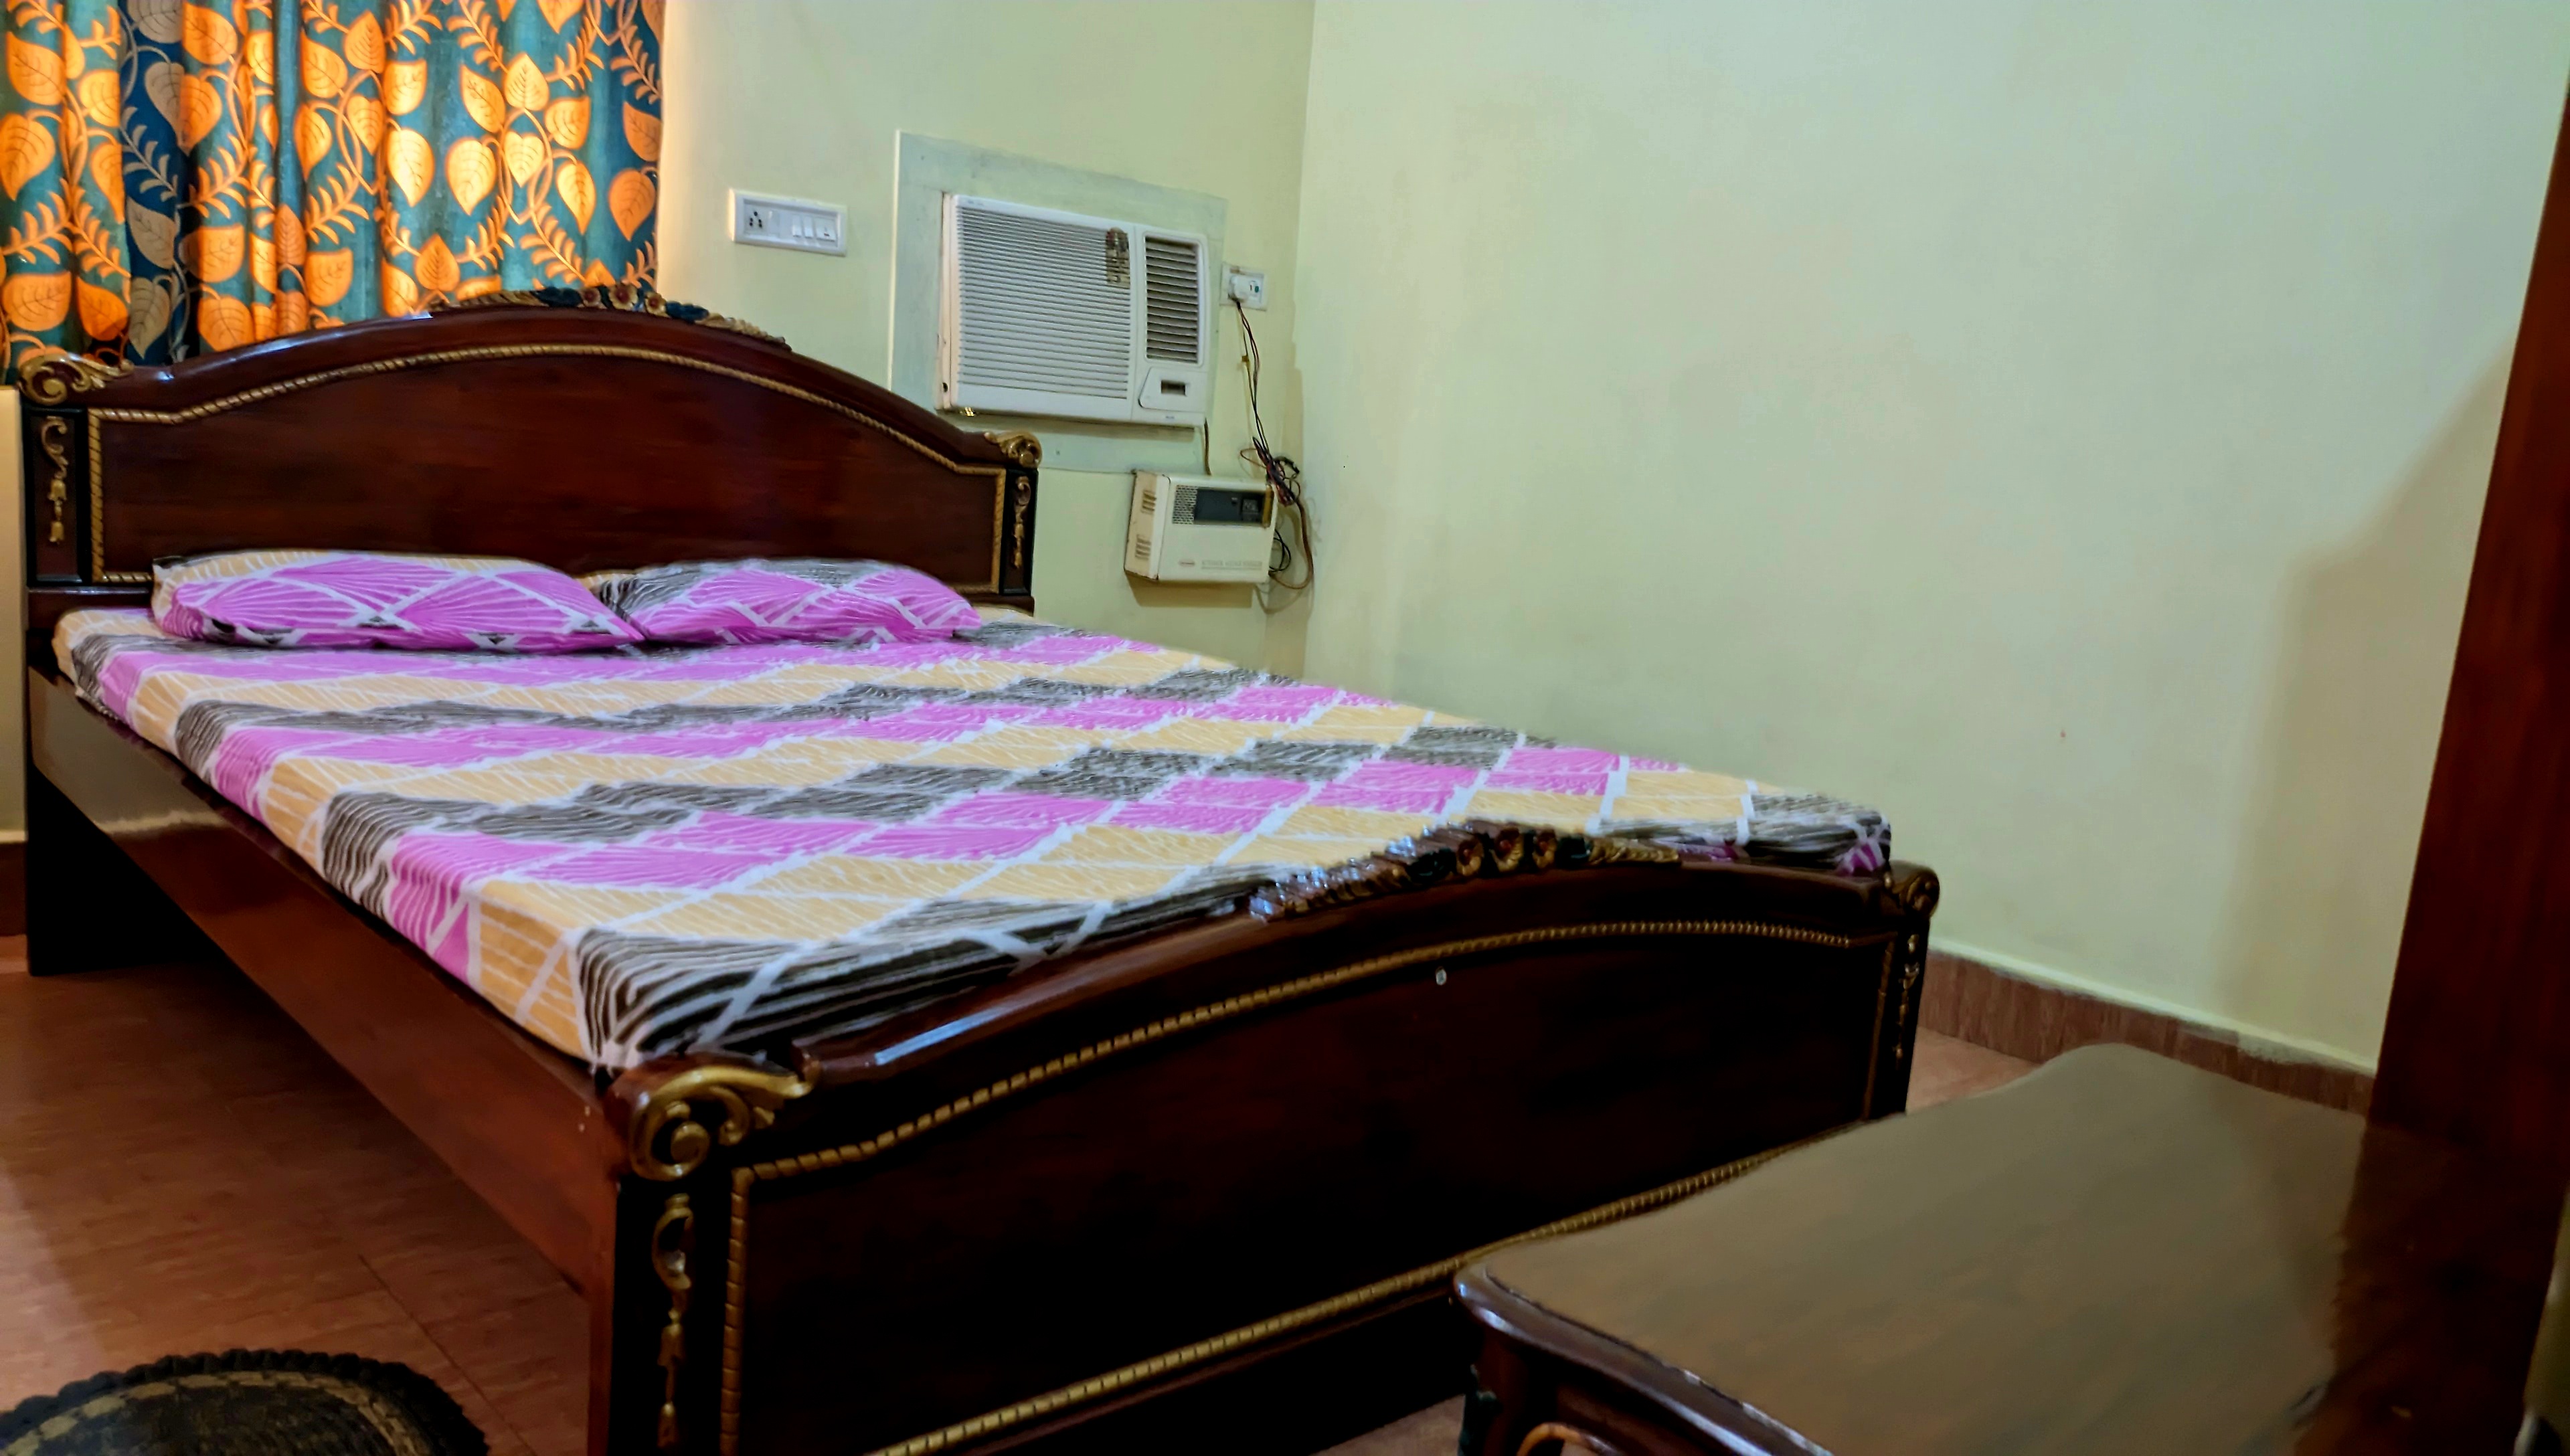 Welcome to Hotel Tarini Lodge & Restaurant. Enjoy Modern Hotel Rooms and Services